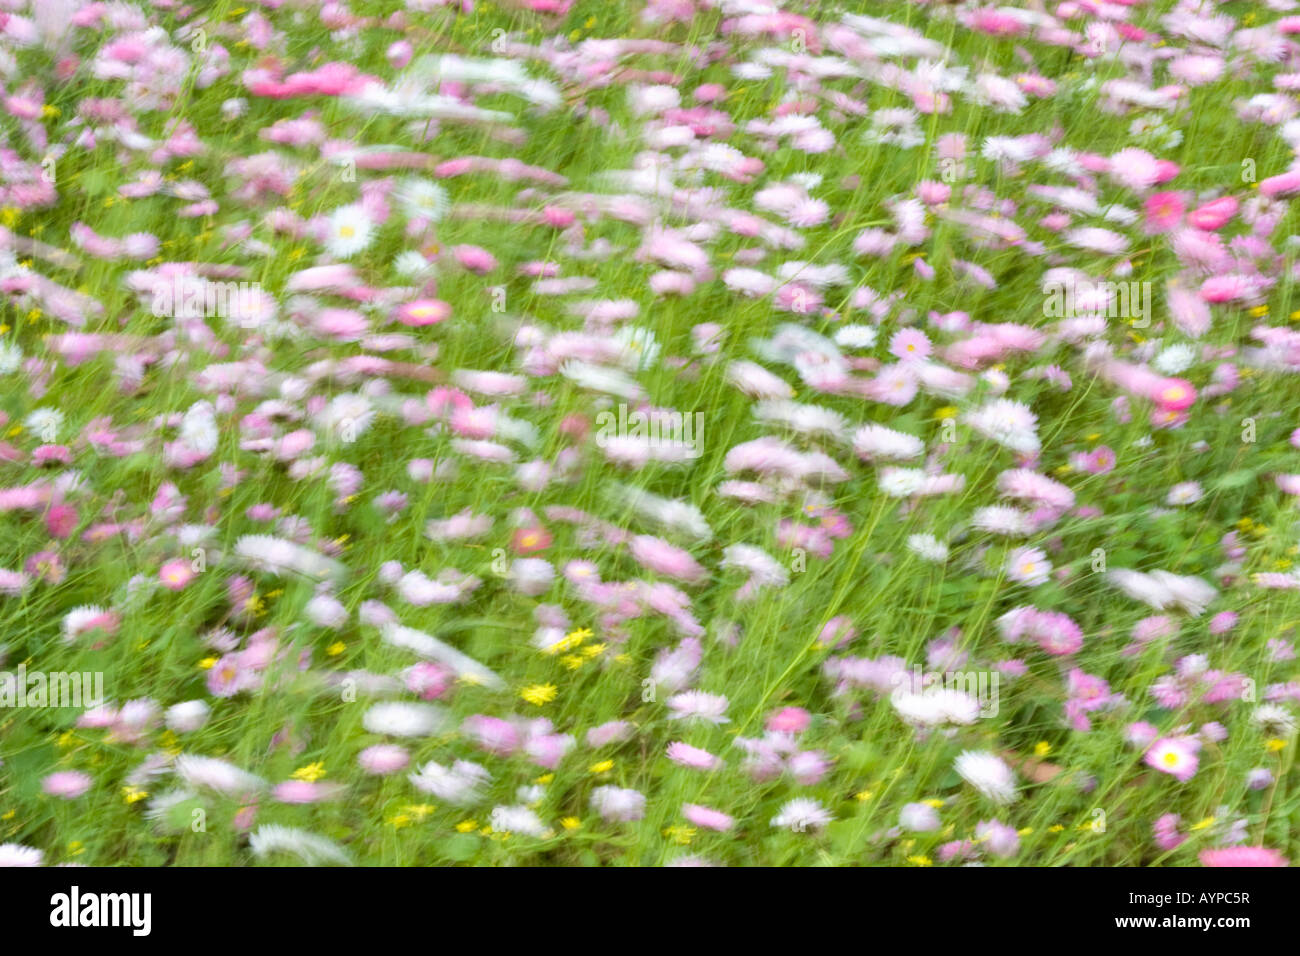 A field of Everlasting flowers (rhodanthe chlorocephala) gently blowing in the wind giving a blurred motion effect. Perth, Aus. Stock Photo